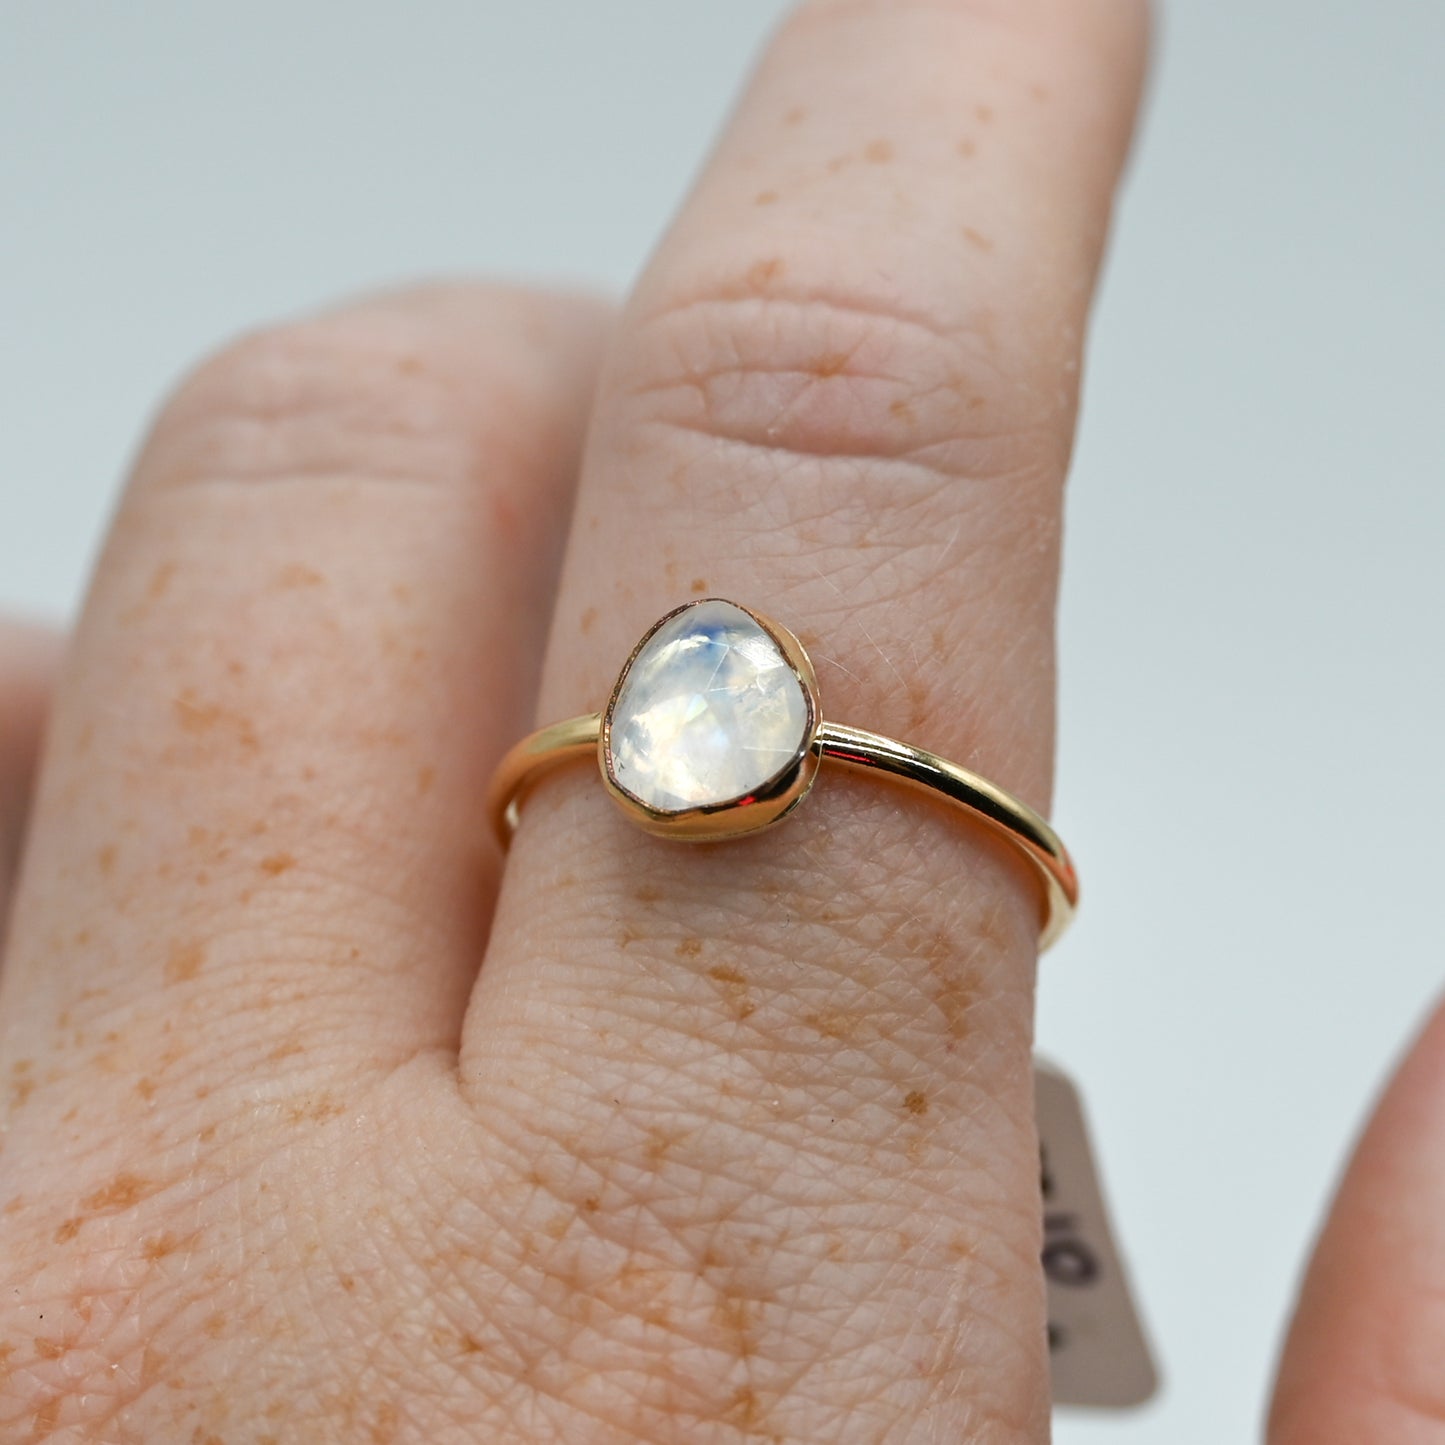 Gold fill rose cut moonstone size 10